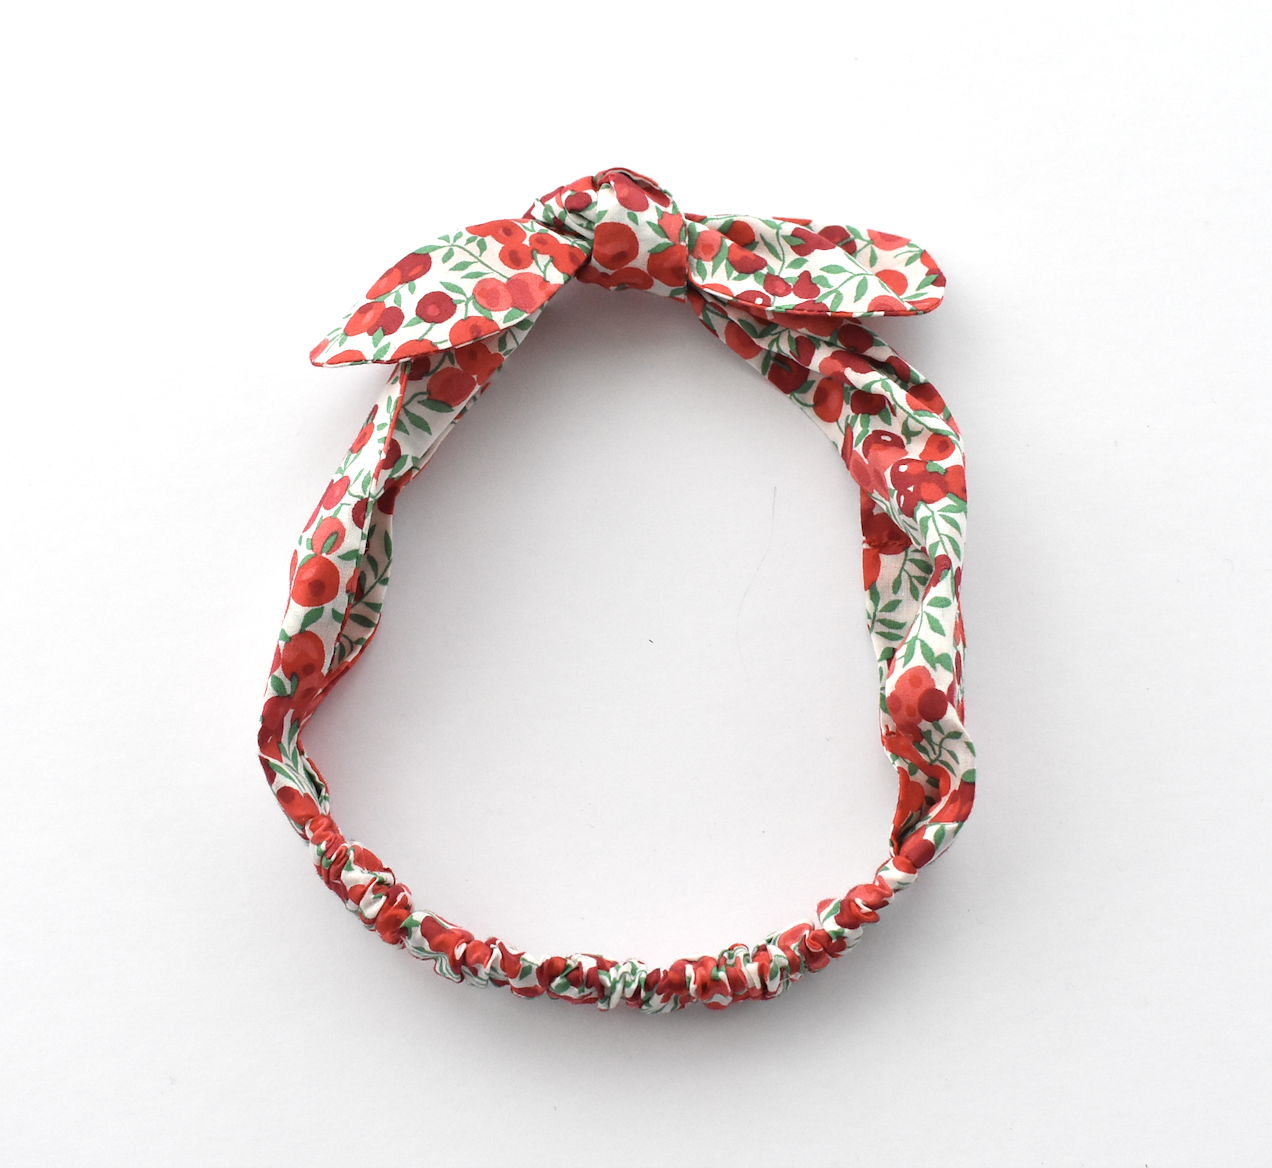 Kids Christmas Tot Knot hairband - Liberty of London Wiltshire Berries for Christmas - Tot Knots of Brighton